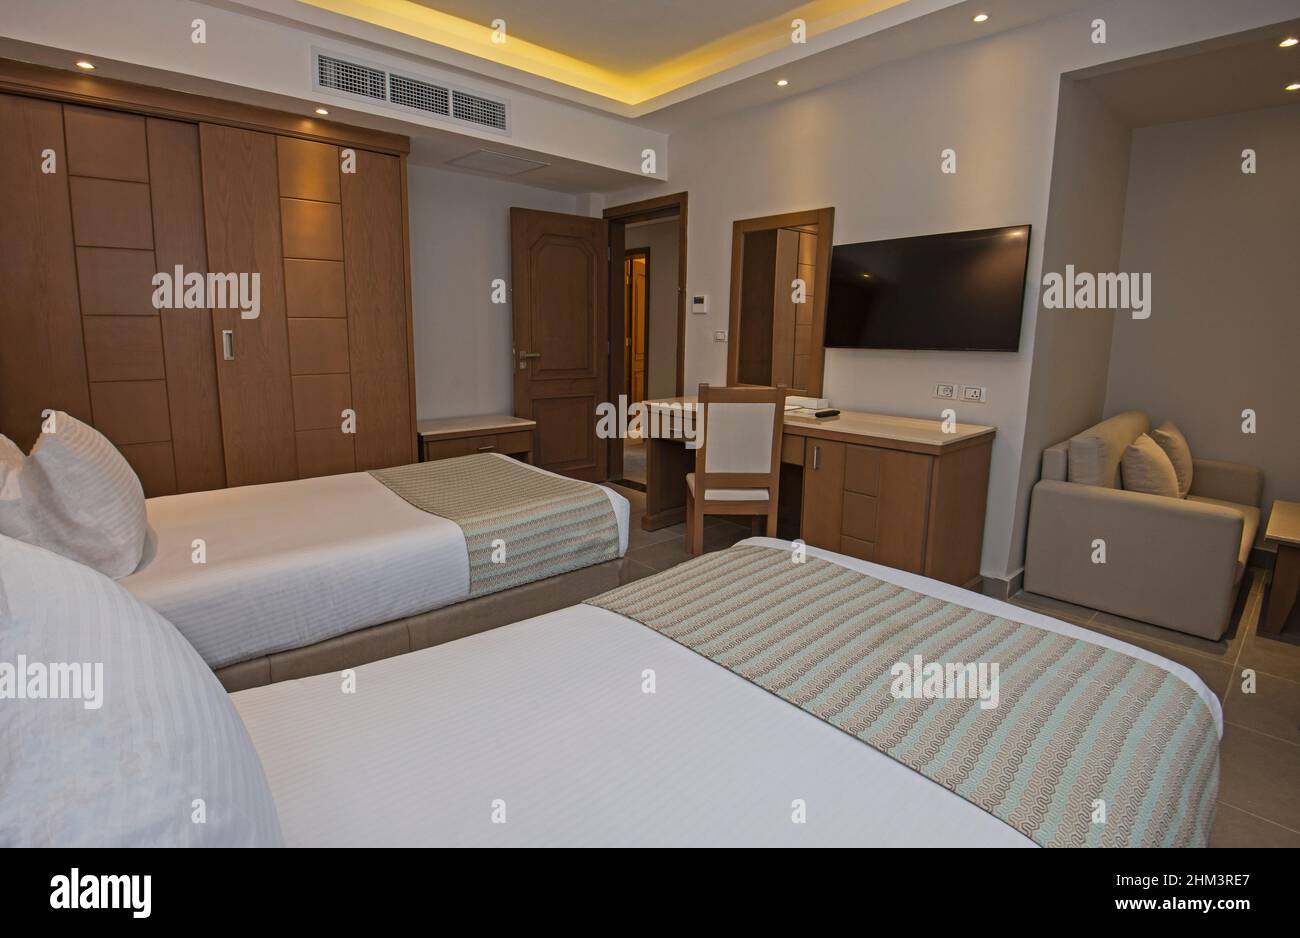 Twin beds in suite of a luxury hotel room with modern interior ...